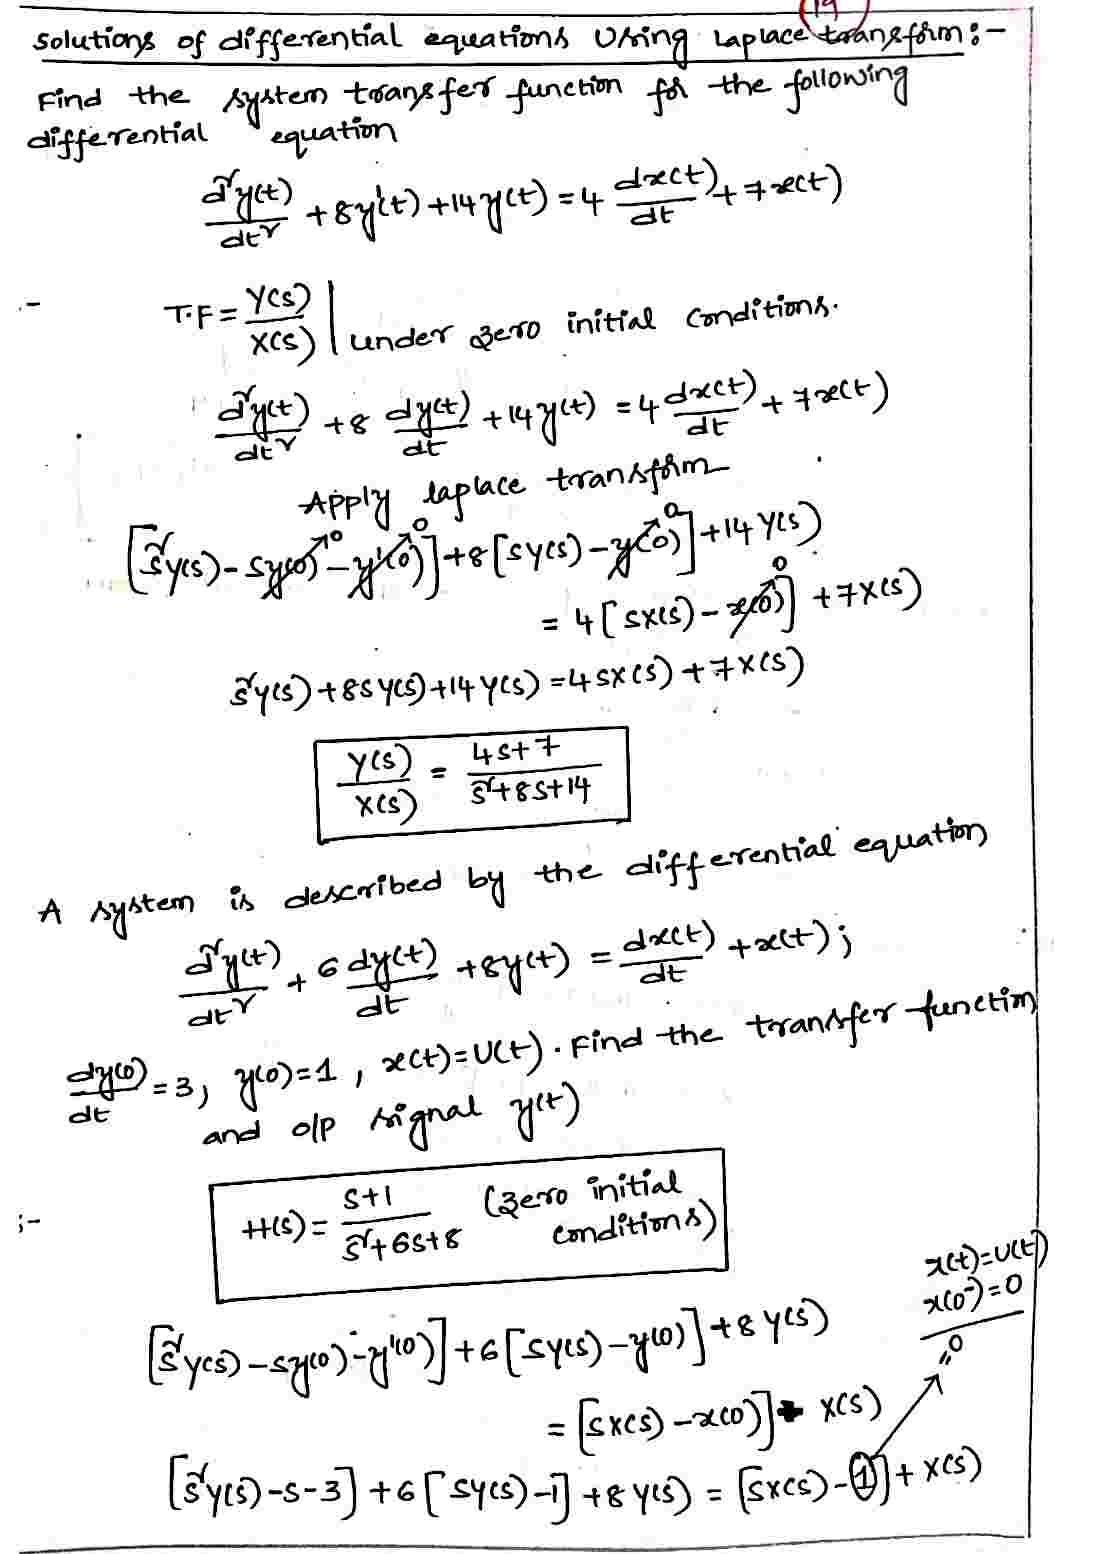 Solution_of_Differential_Equations_Using_Laplace_Transform